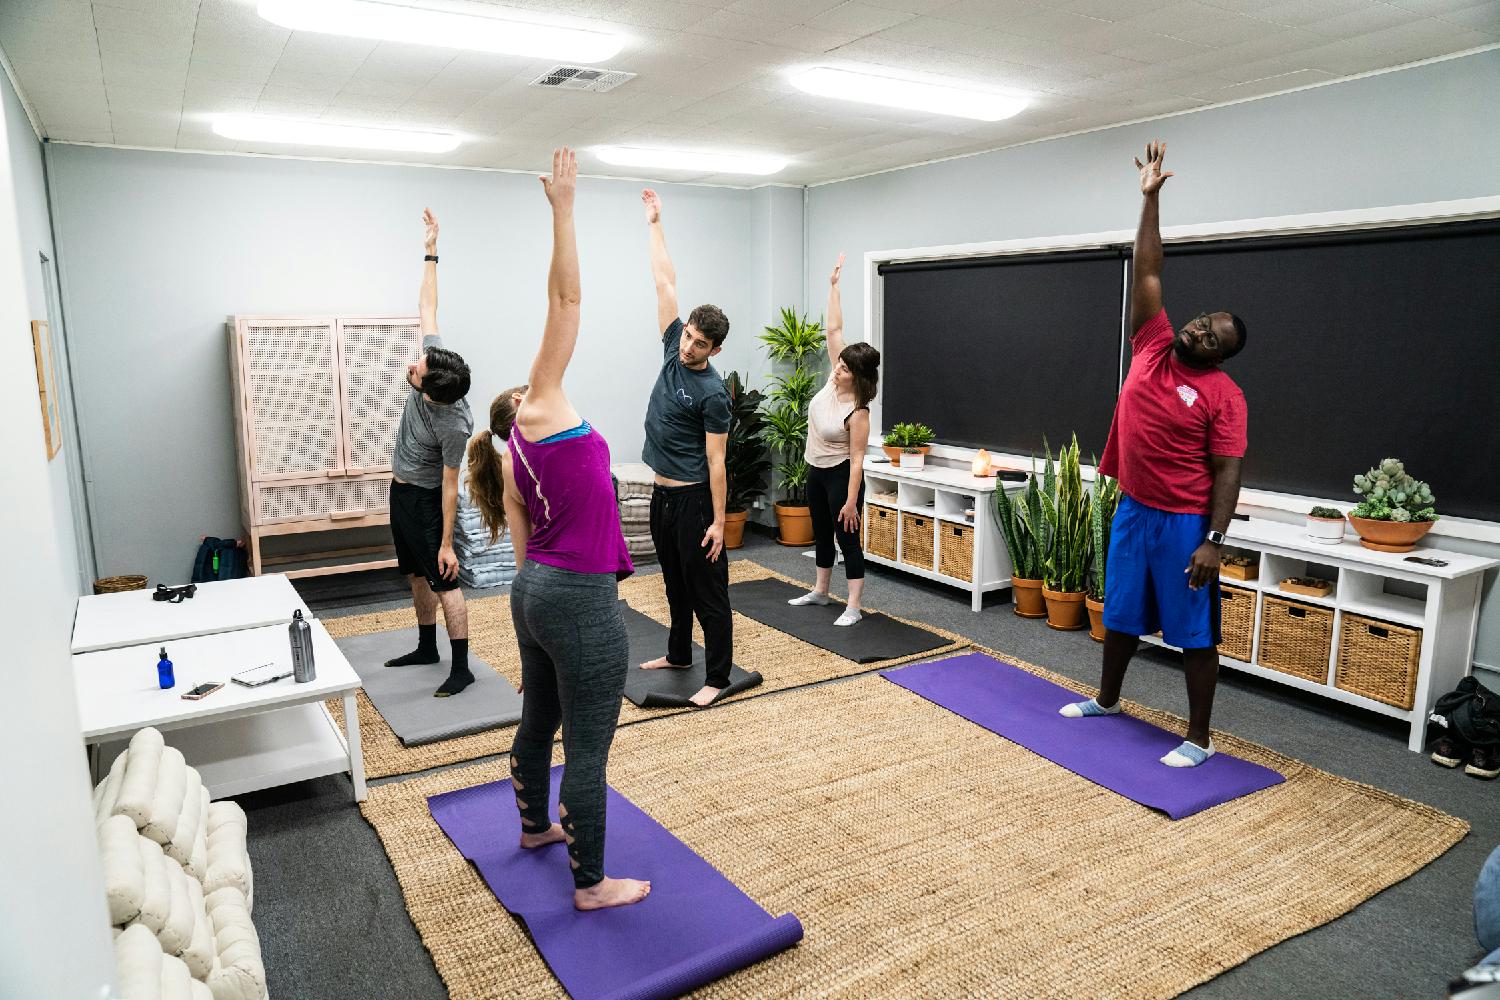 Serenity features meditation, yoga, and other mindfulness options for employees to enjoy throughout the day.